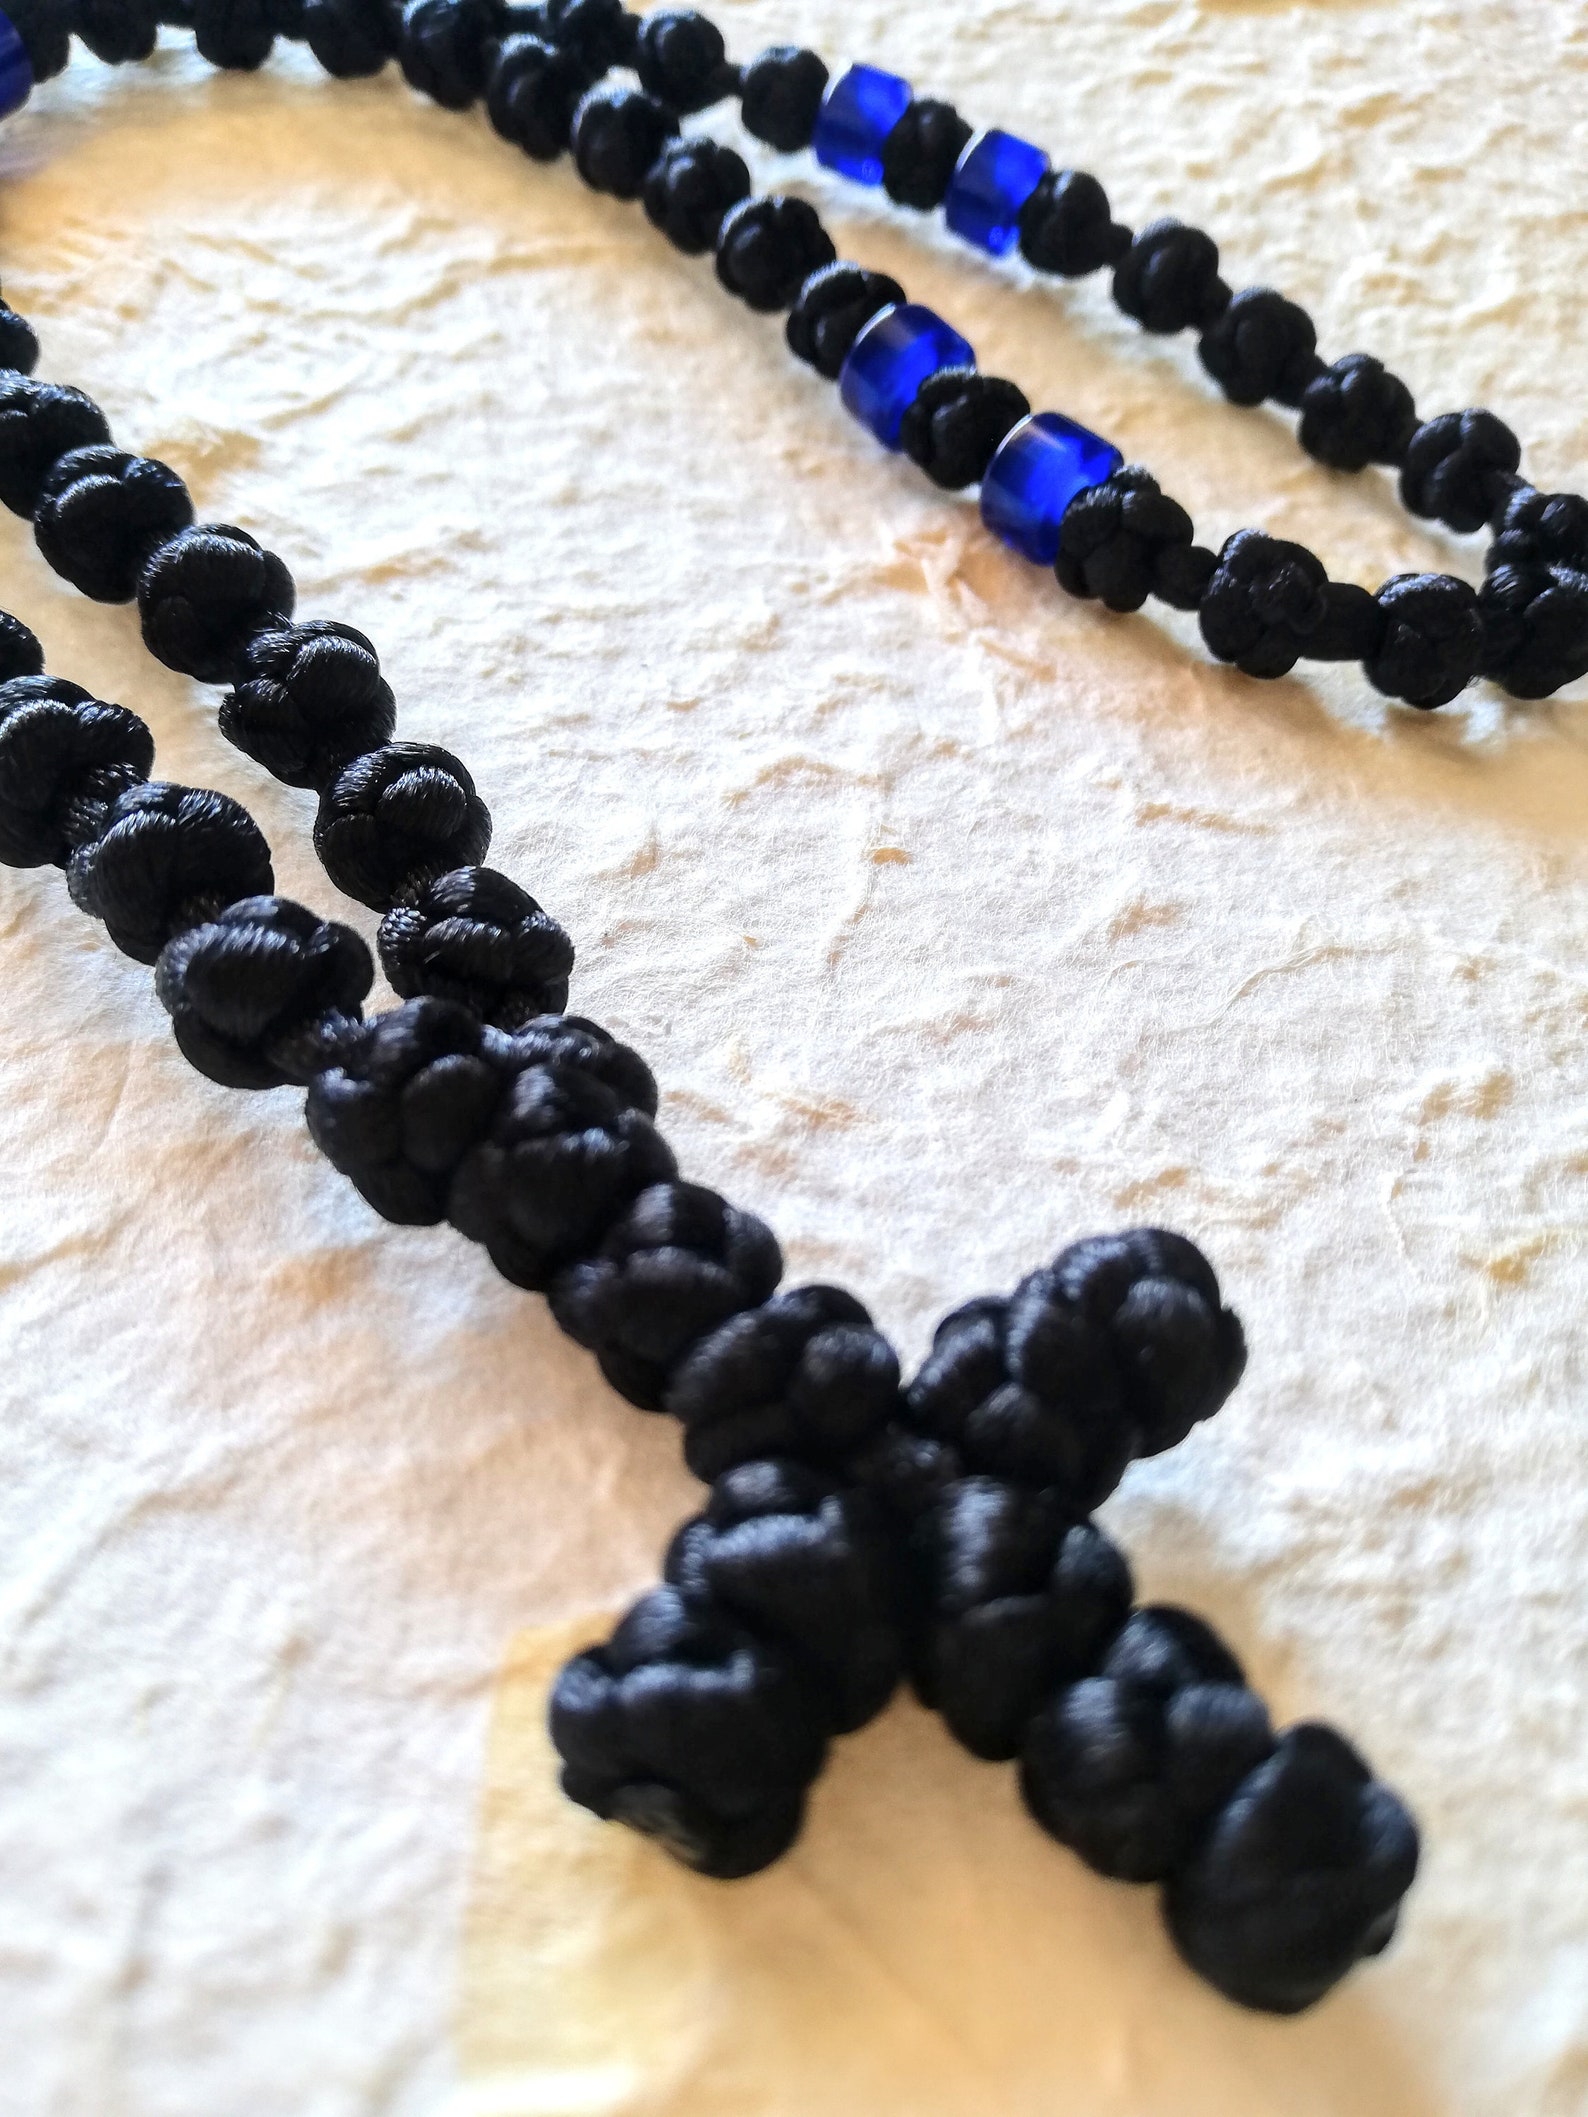 Semi Spaced Knotted Prayer Rope Black With Blue Beads - Etsy